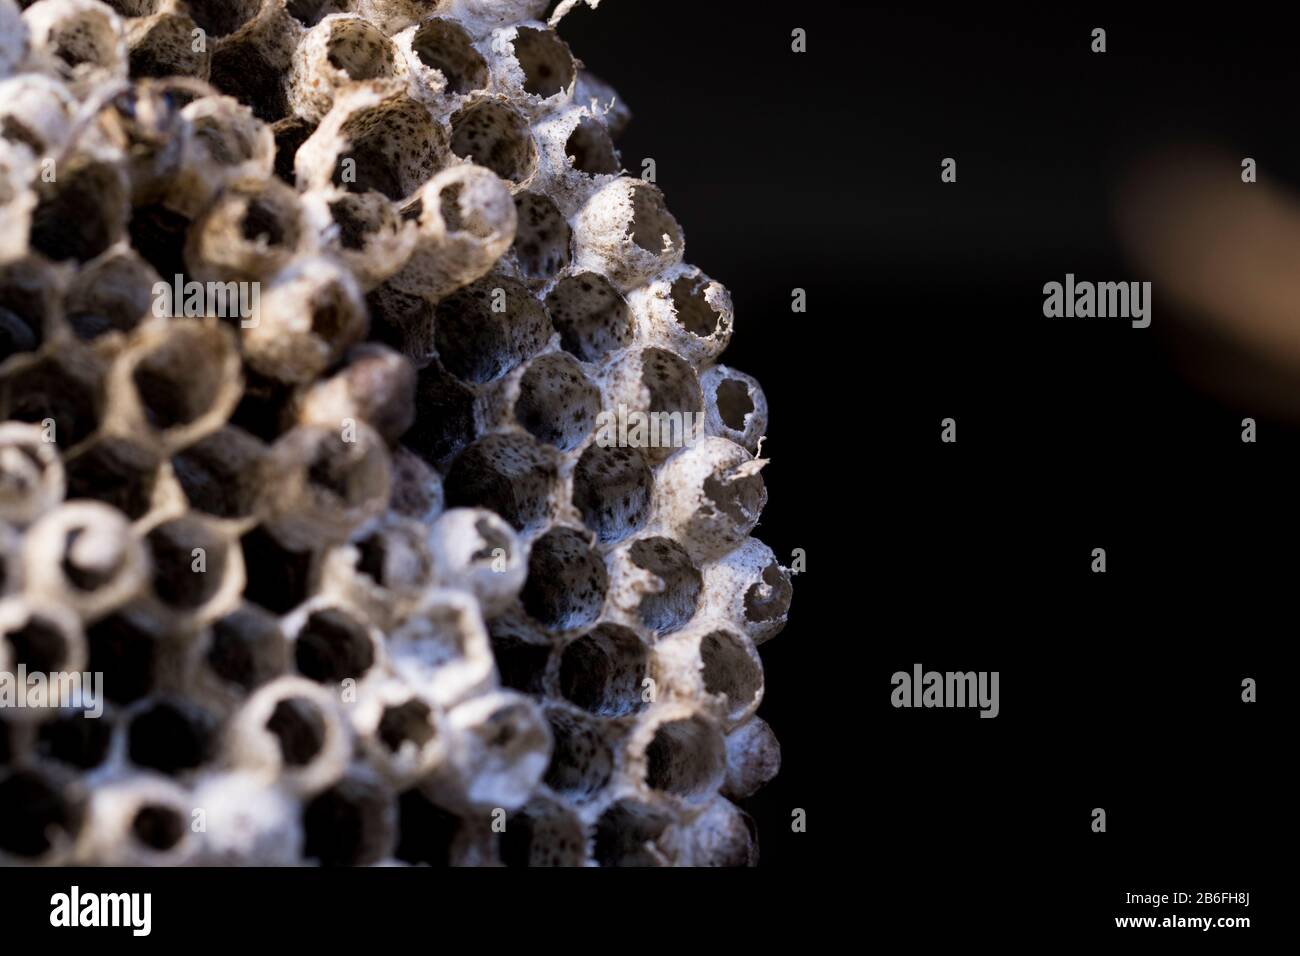 Honeycomb patter close up bee or wasp nest macro view. Hexagon shaped pattern found in nature. Empty hornet nest. Stock Photo